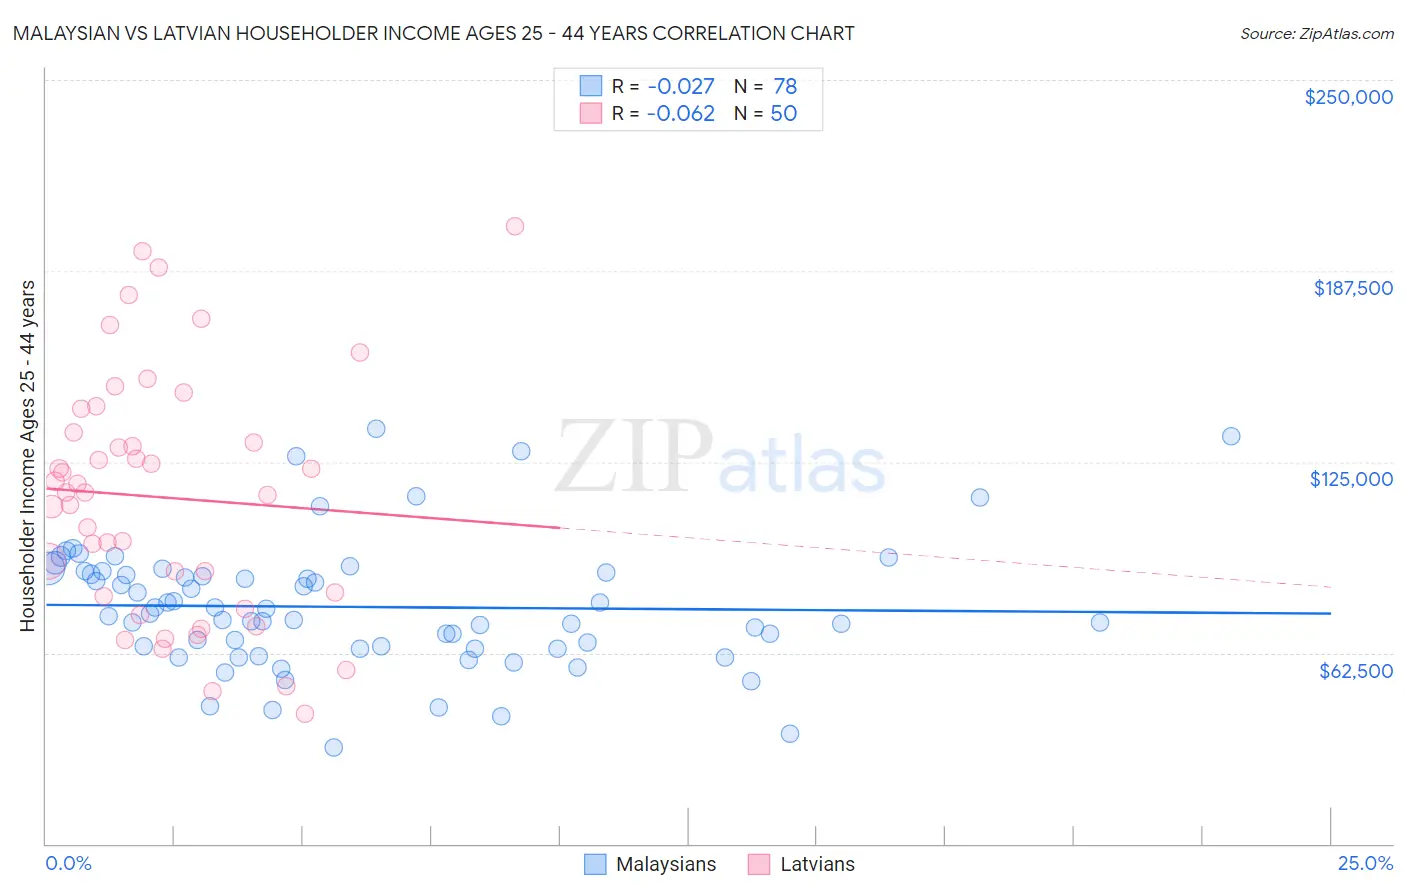 Malaysian vs Latvian Householder Income Ages 25 - 44 years